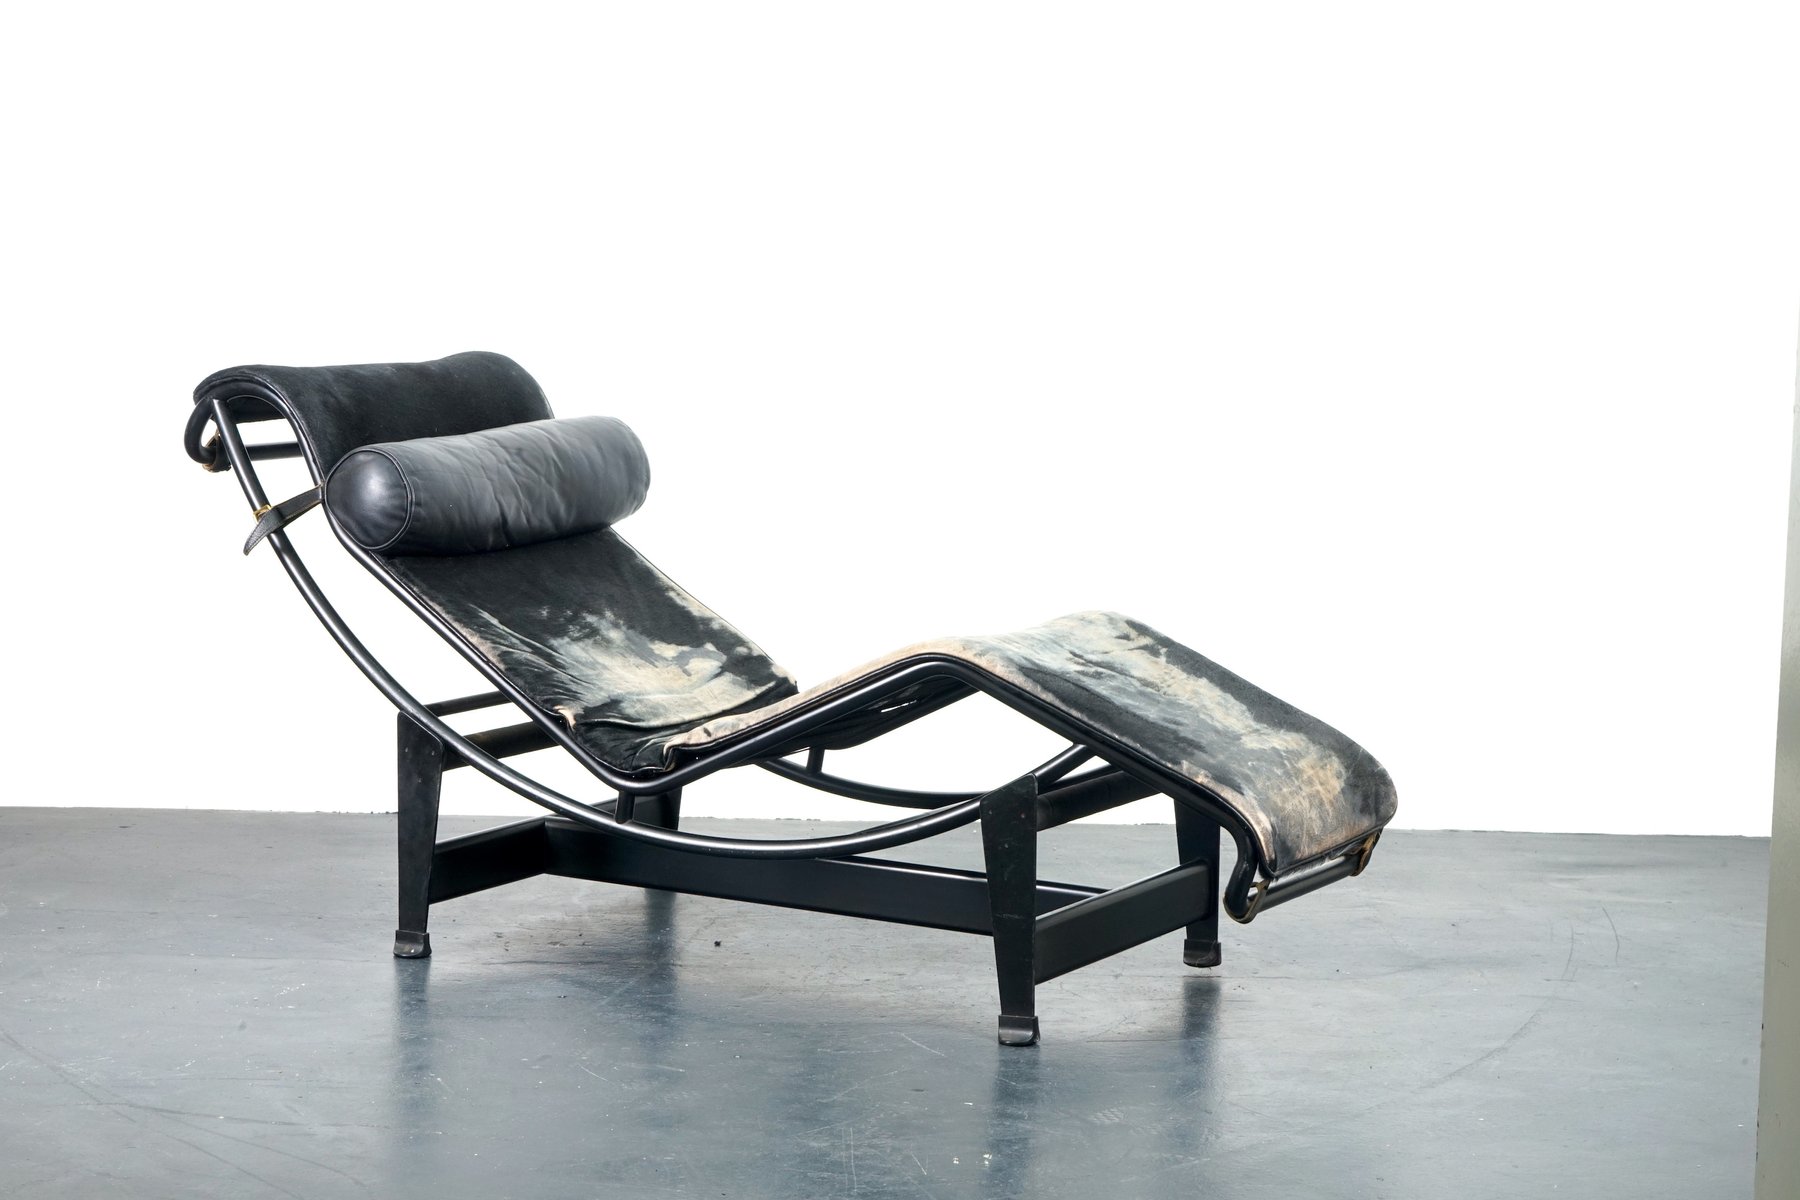 vintage lc4 chaise longue by charlotte perriand le corbusier pierre jeanneret for cassina 1970s CIP-1031316